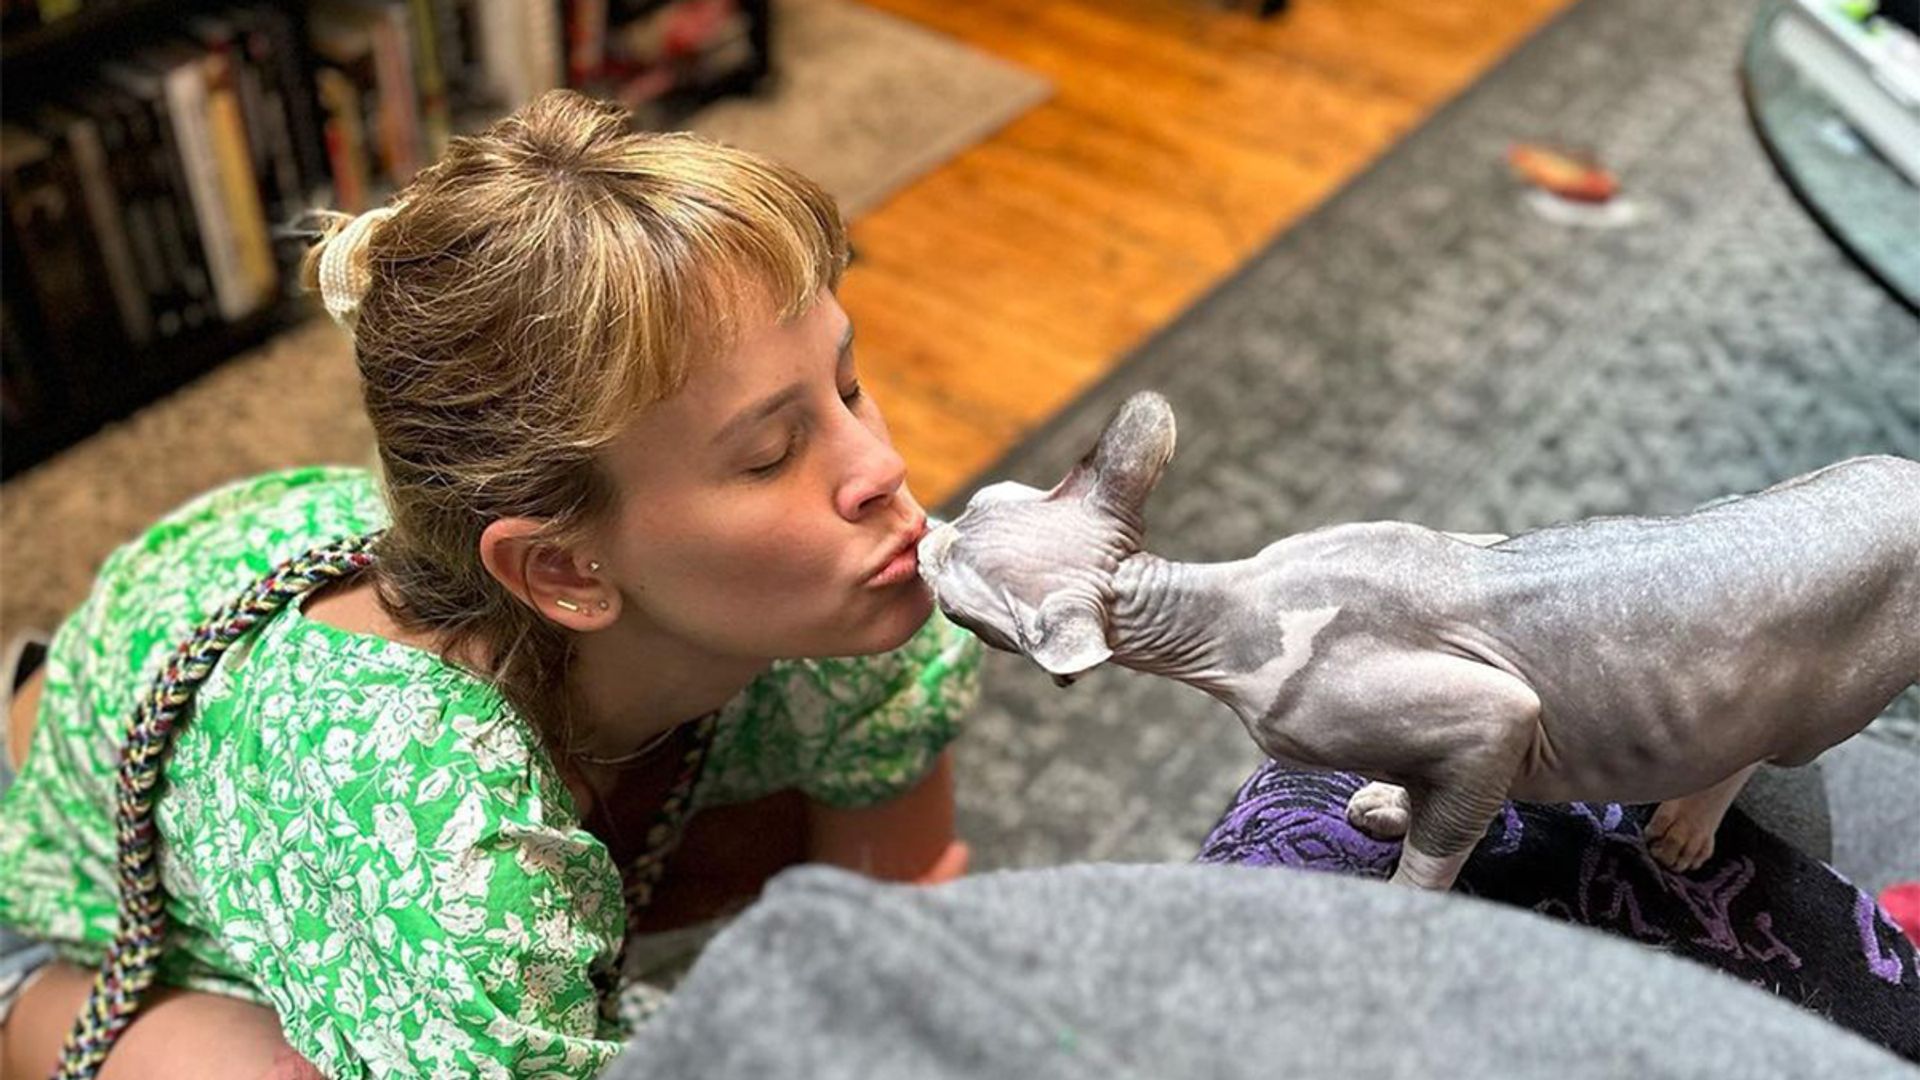 Sosie Bacon kisses her cat's nose in sweet photo